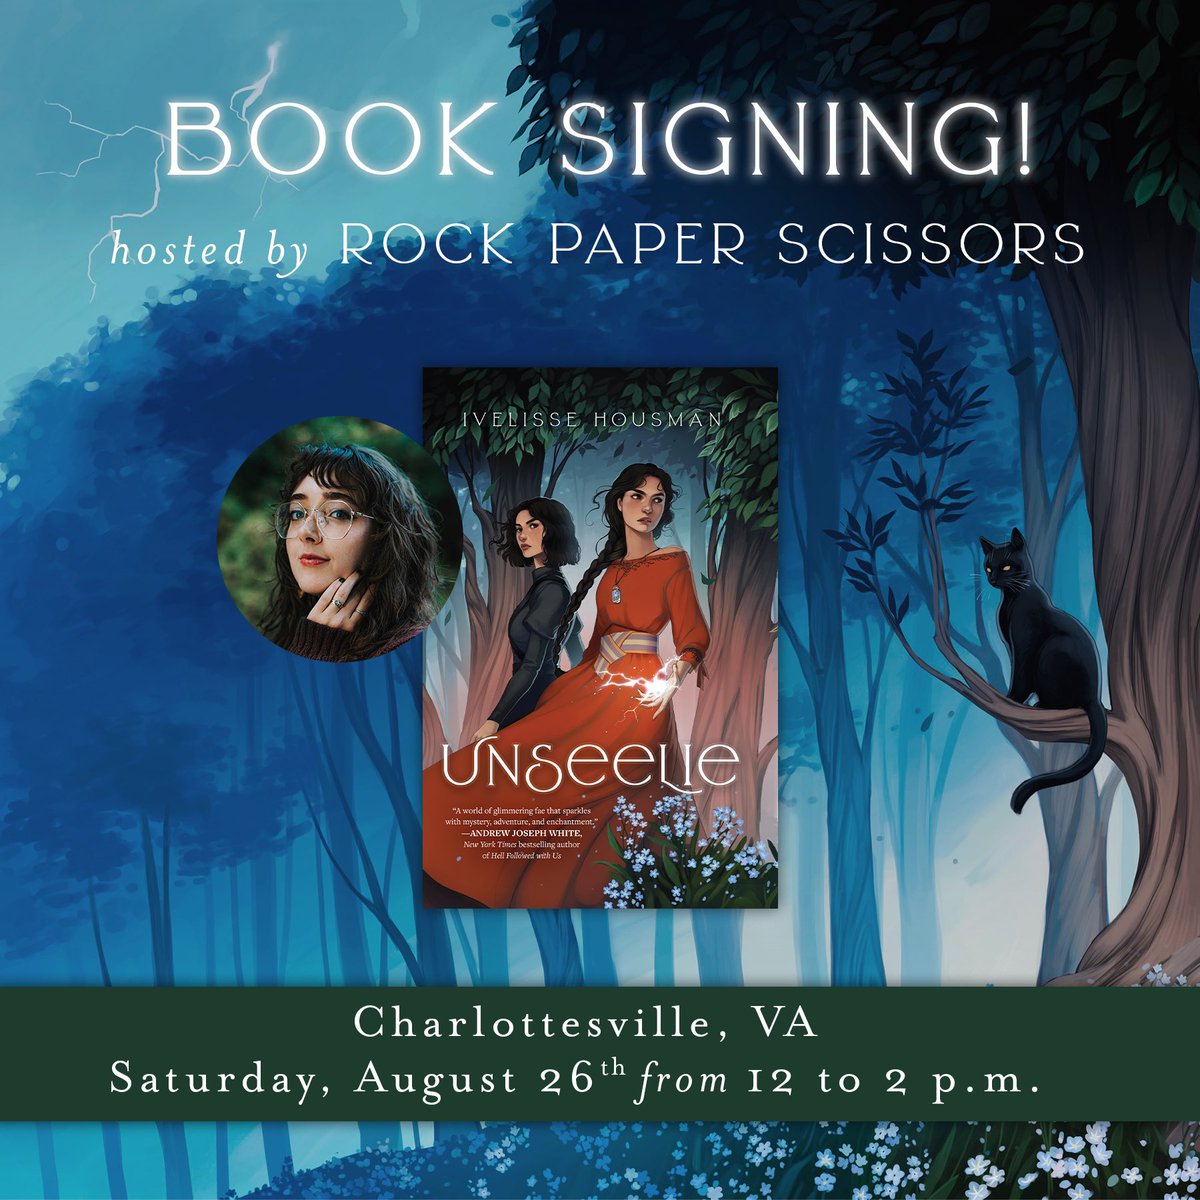 This weekend! Find me signing books and smelling all the candles at Rock Paper Scissors in Charlottesville, VA! ⚡️💙